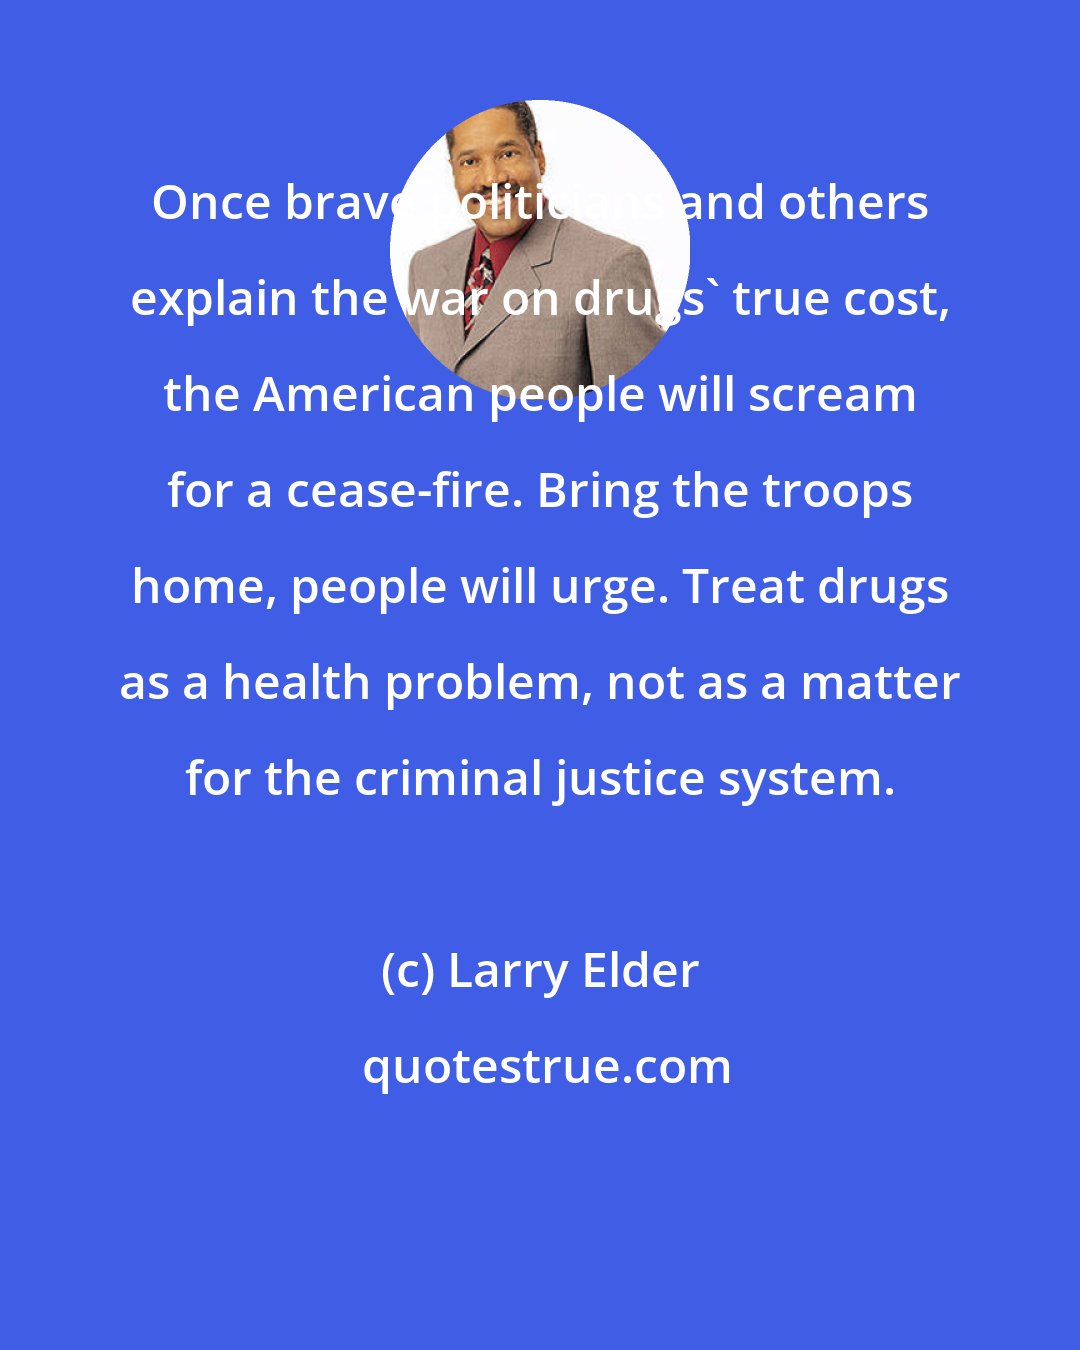 Larry Elder: Once brave politicians and others explain the war on drugs' true cost, the American people will scream for a cease-fire. Bring the troops home, people will urge. Treat drugs as a health problem, not as a matter for the criminal justice system.